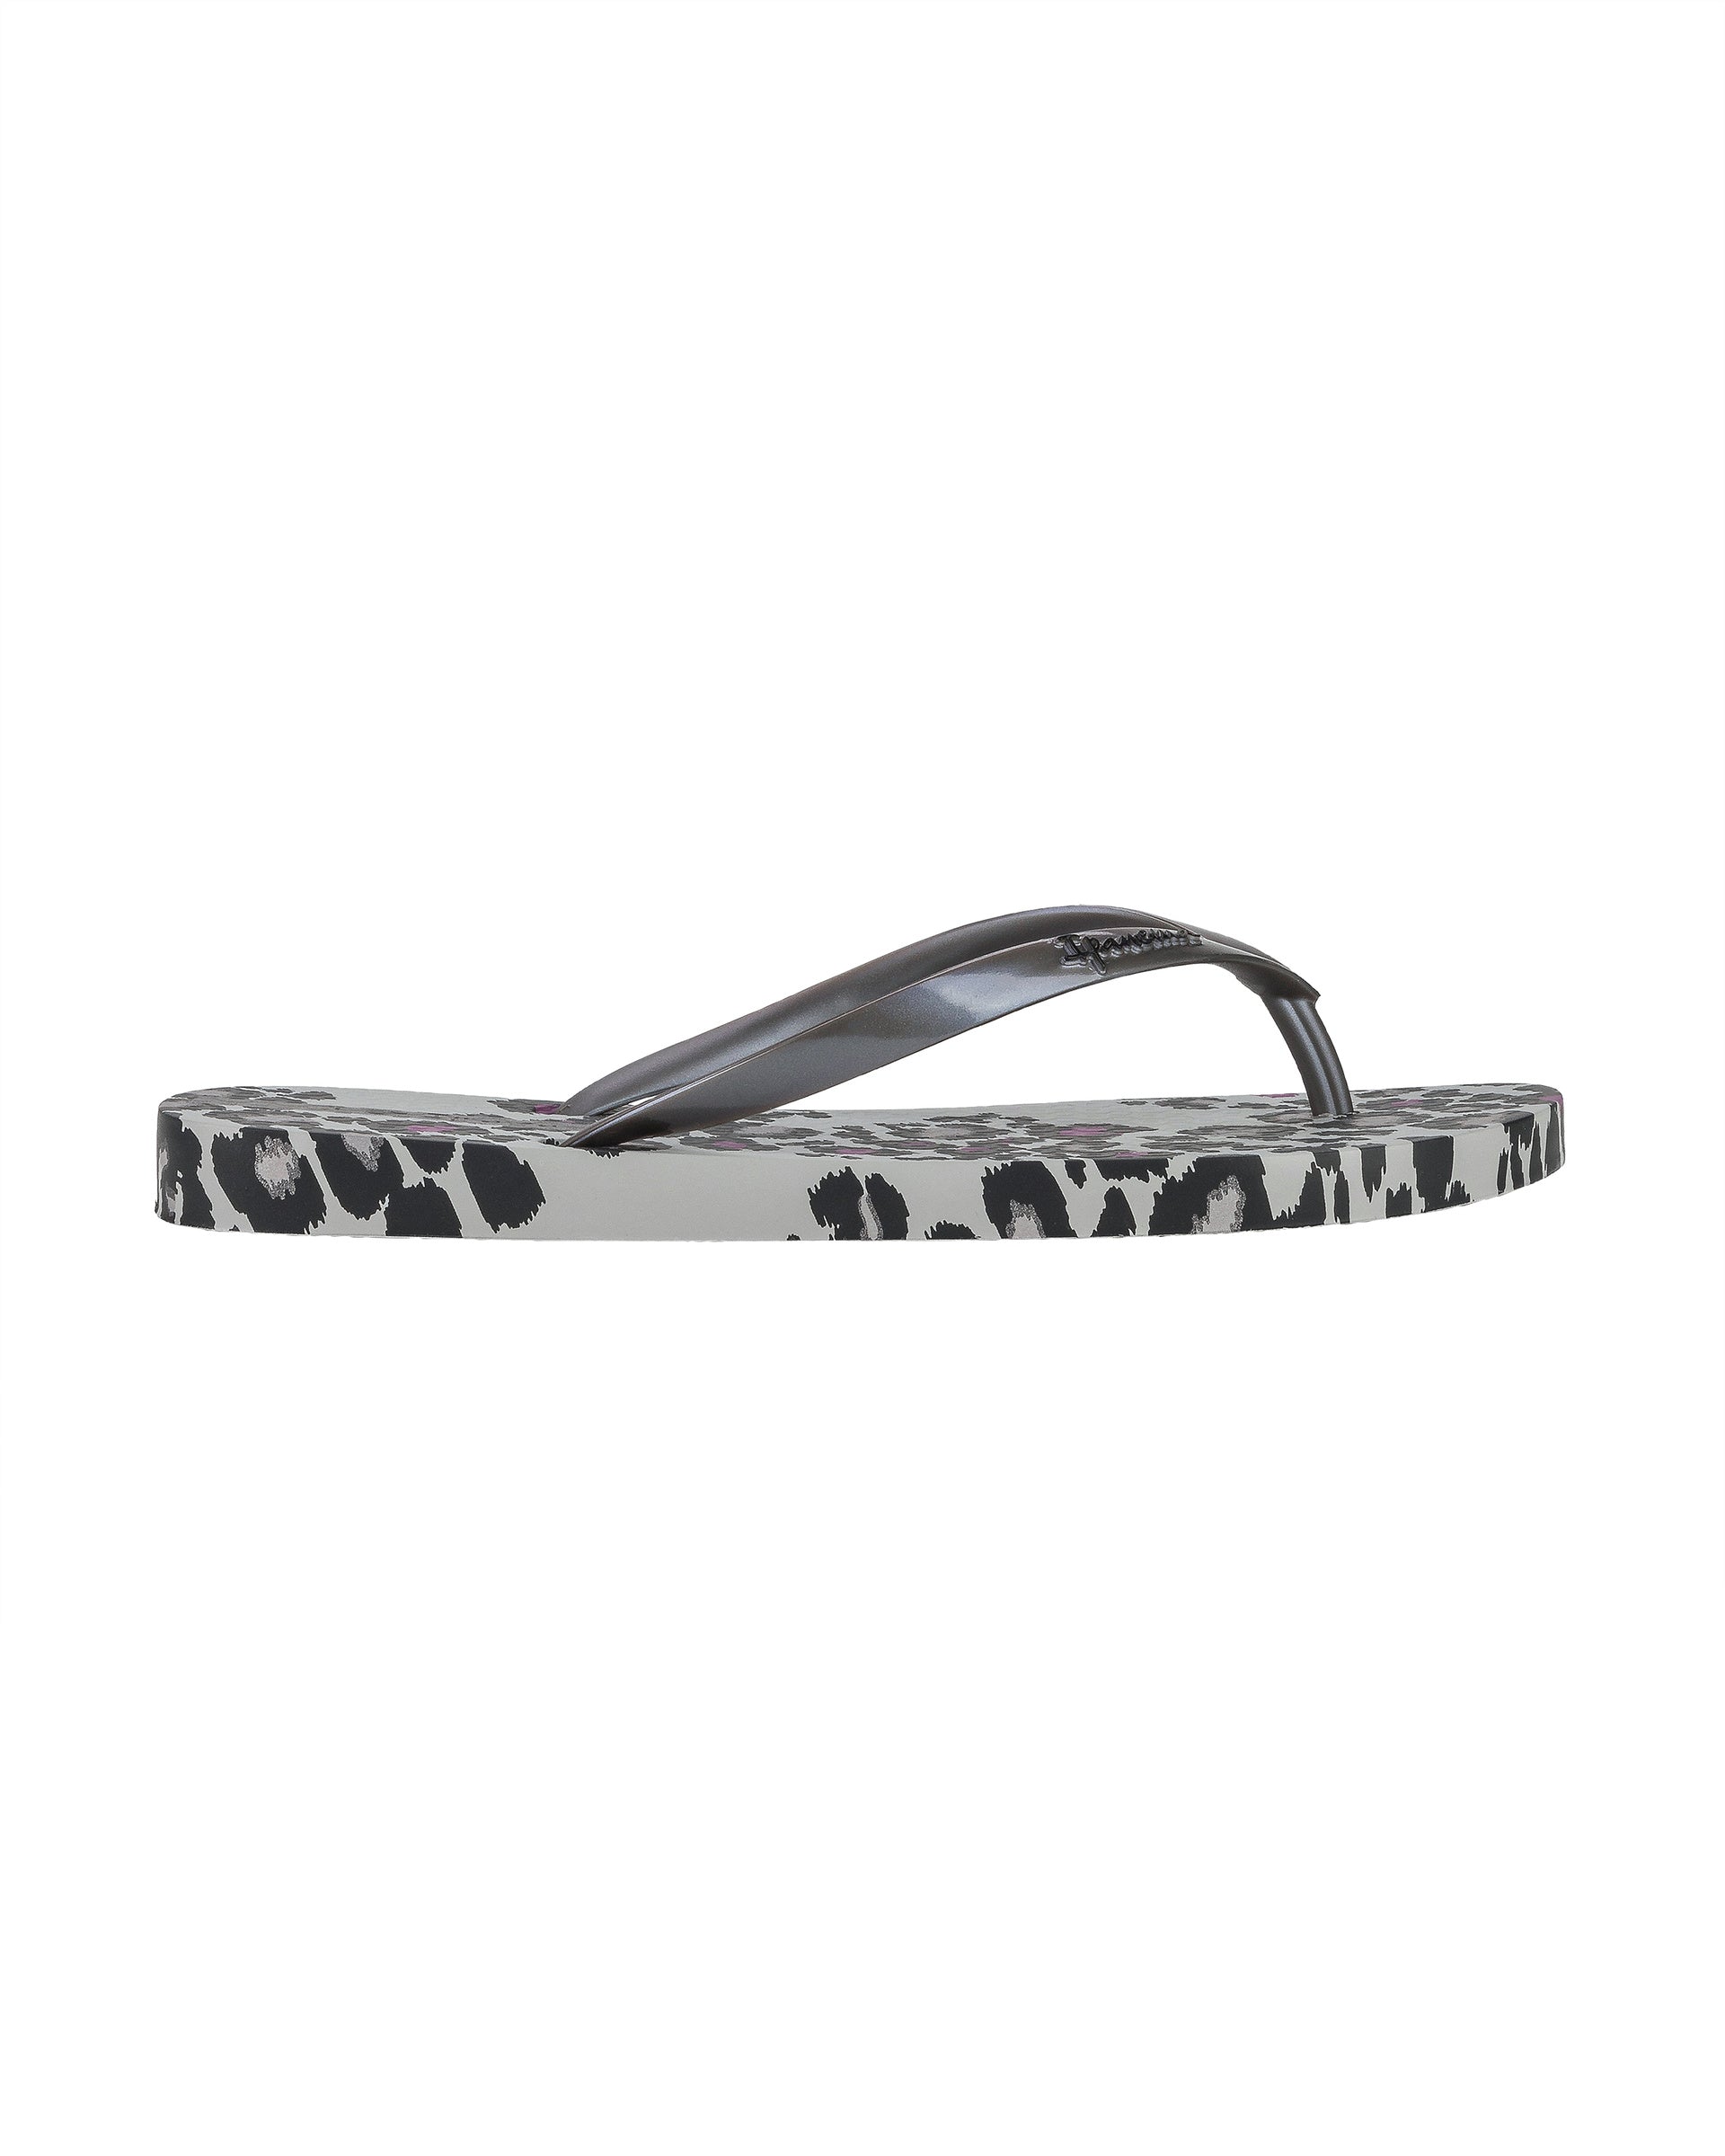 Outer side view of a grey Ipanema Animal Print women's flip flop with glitter grey straps and leopard sole print.